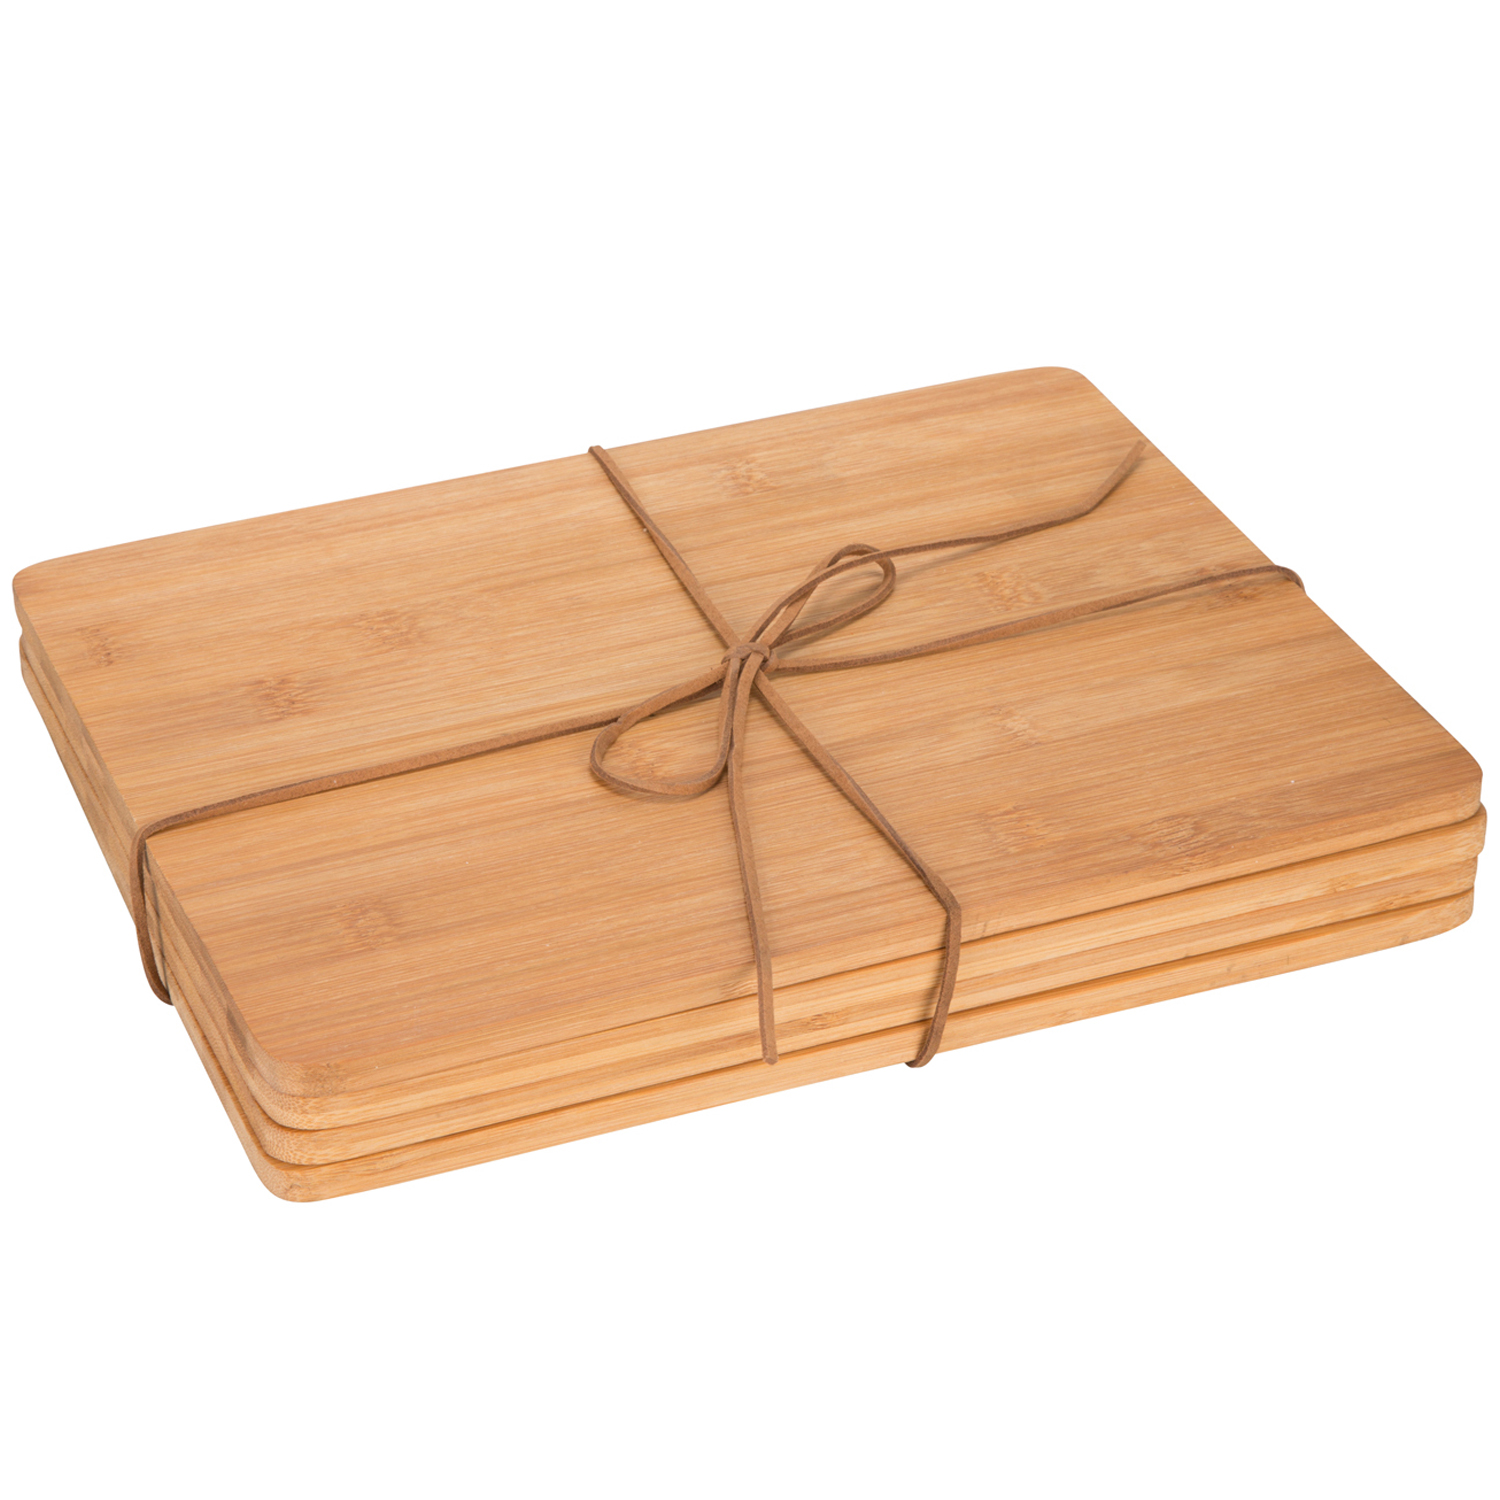 Impress Bamboo Placemats 4 Pack Image